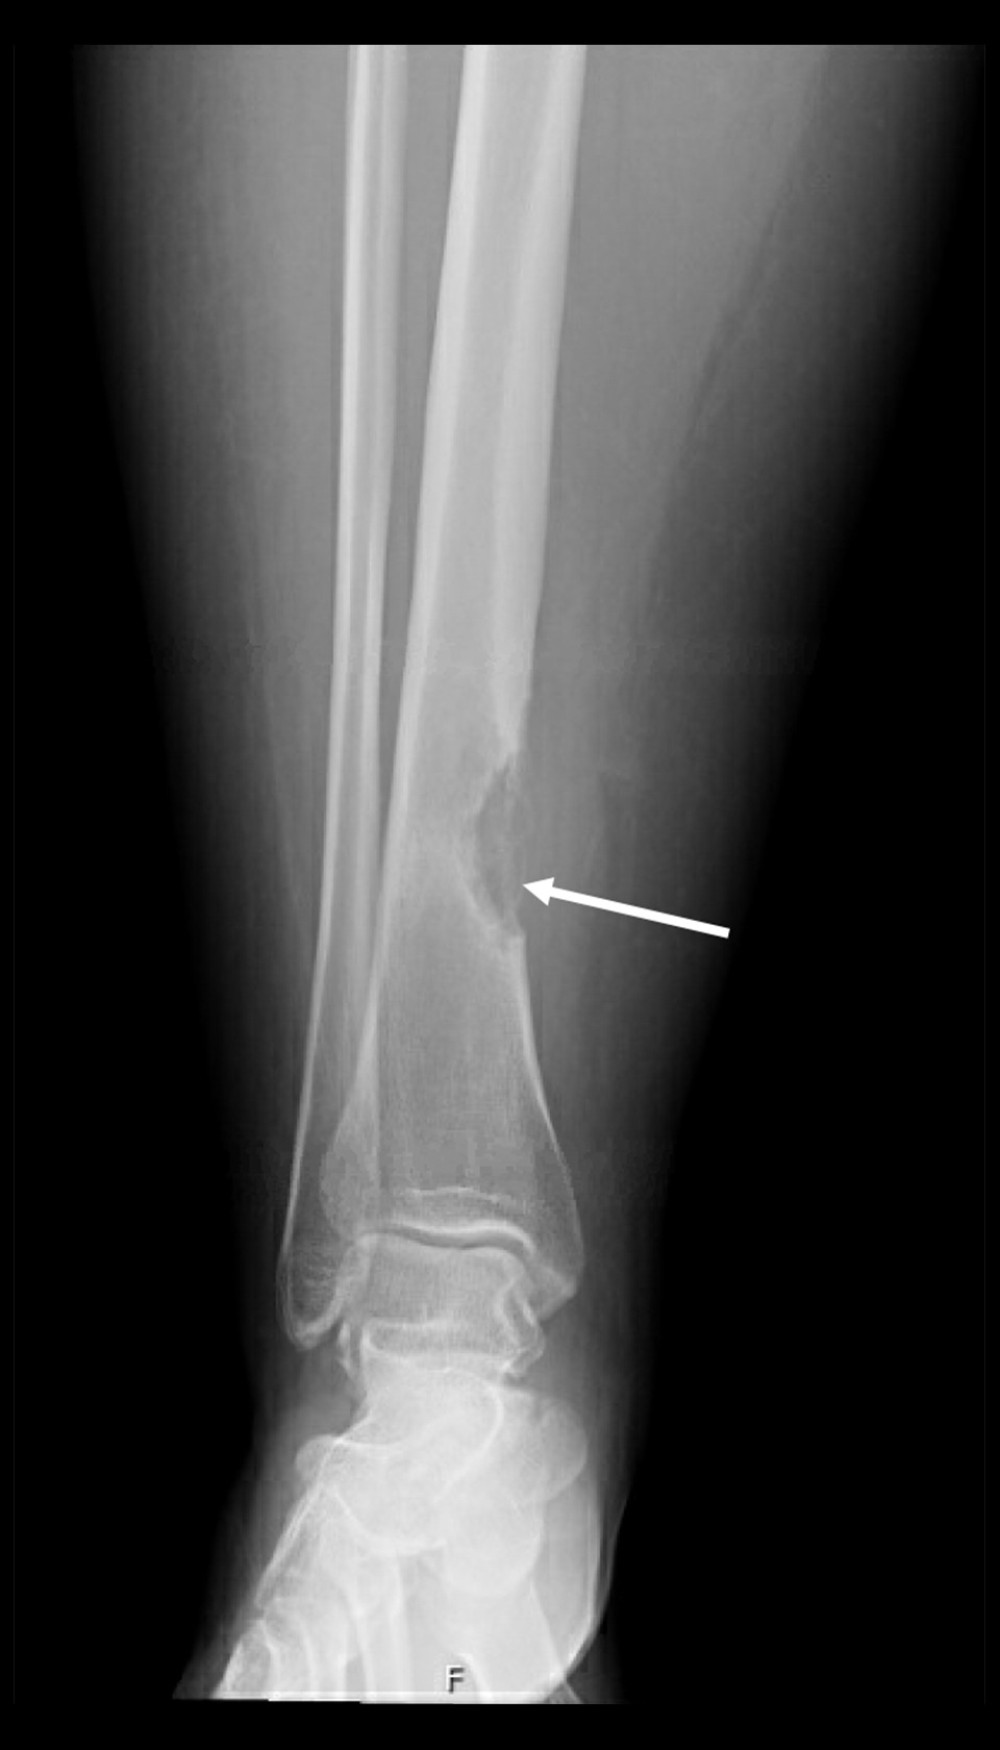 Destructive bone lesion noted at the distal tibial medial cortex with the “shark bite” appearance (arrow) and extending into the soft tissue with calcific focus posteriorly.